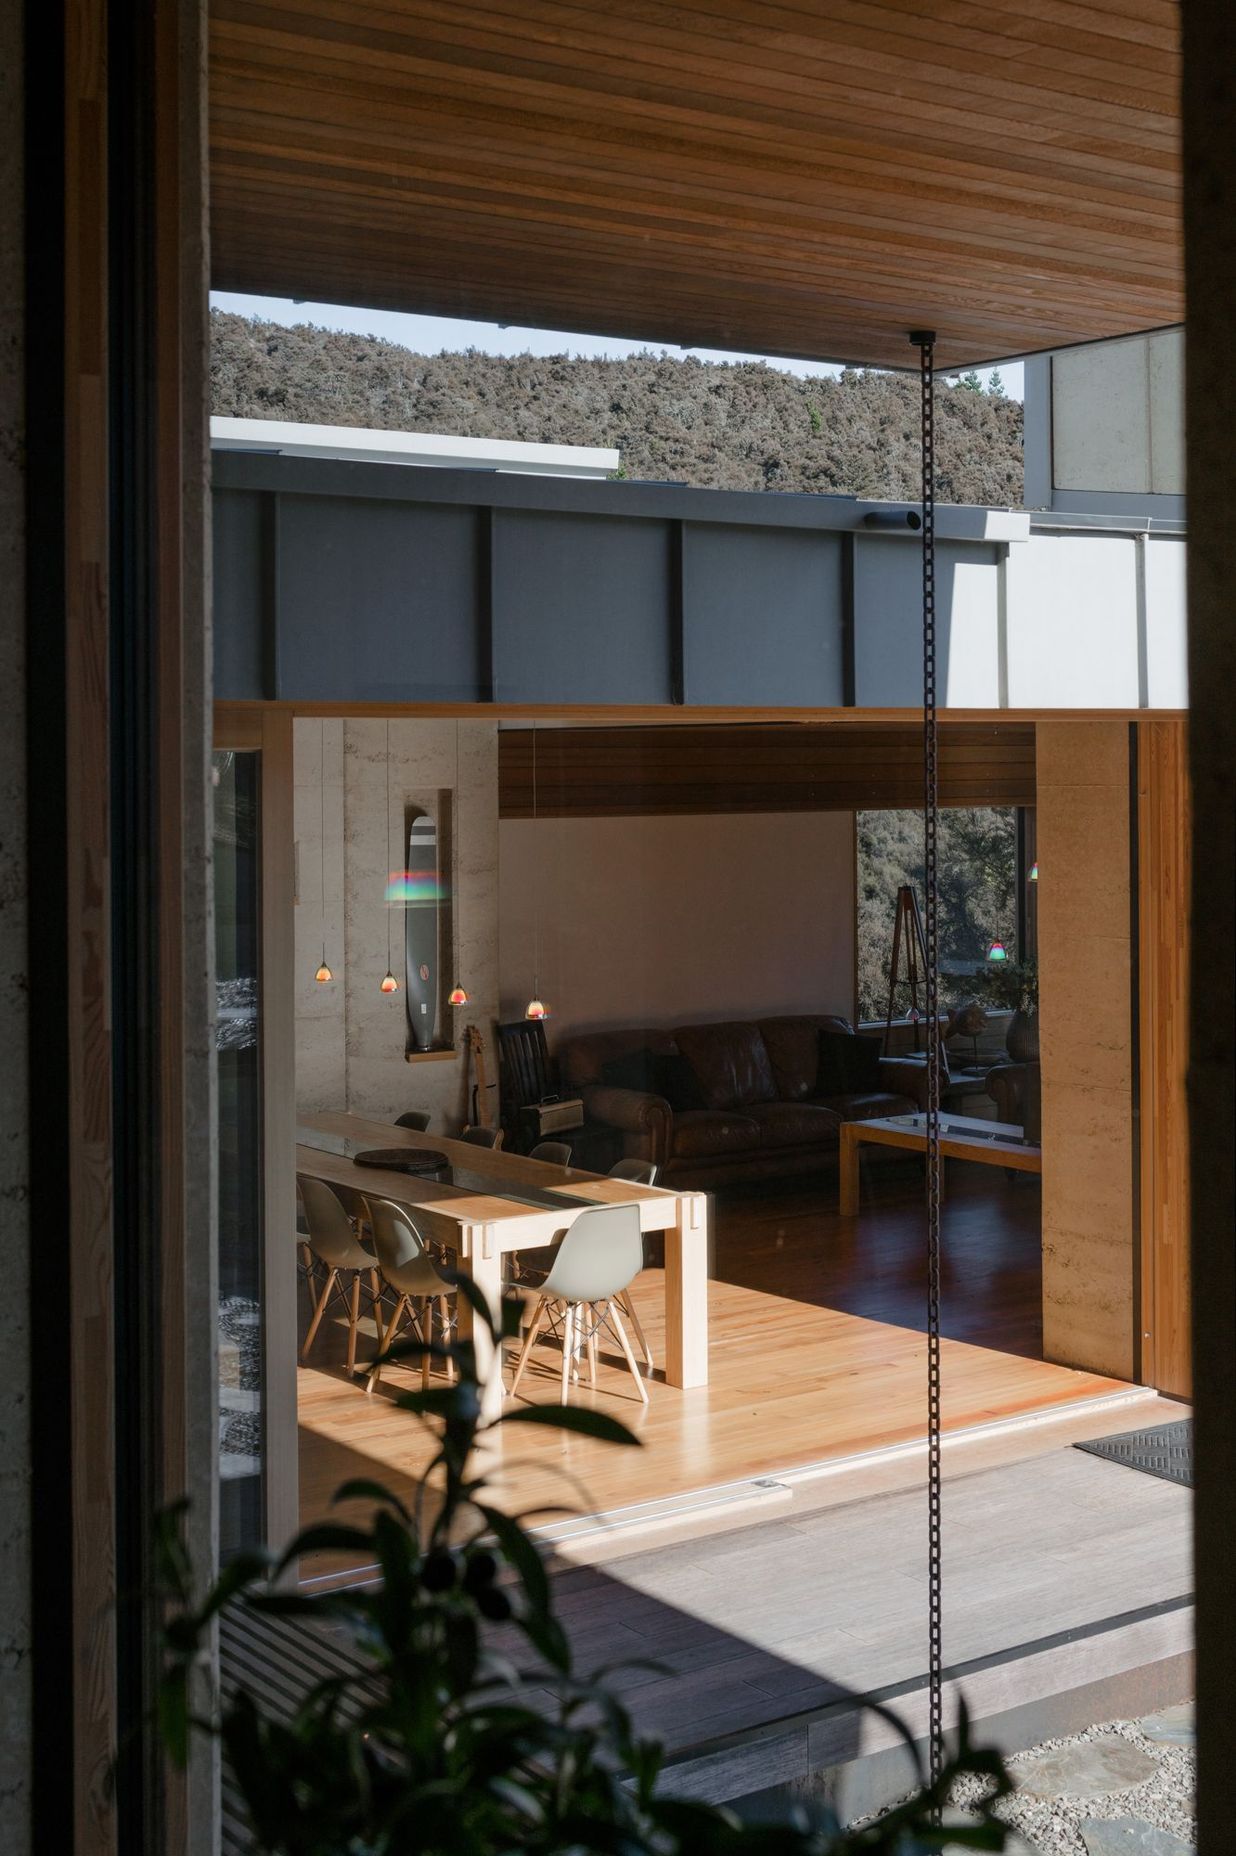 The home's design evolved from traditional Japanese ideals of the ‘house as garden’, with spaces designed to be moved through and that offer glimpses of what is to come.